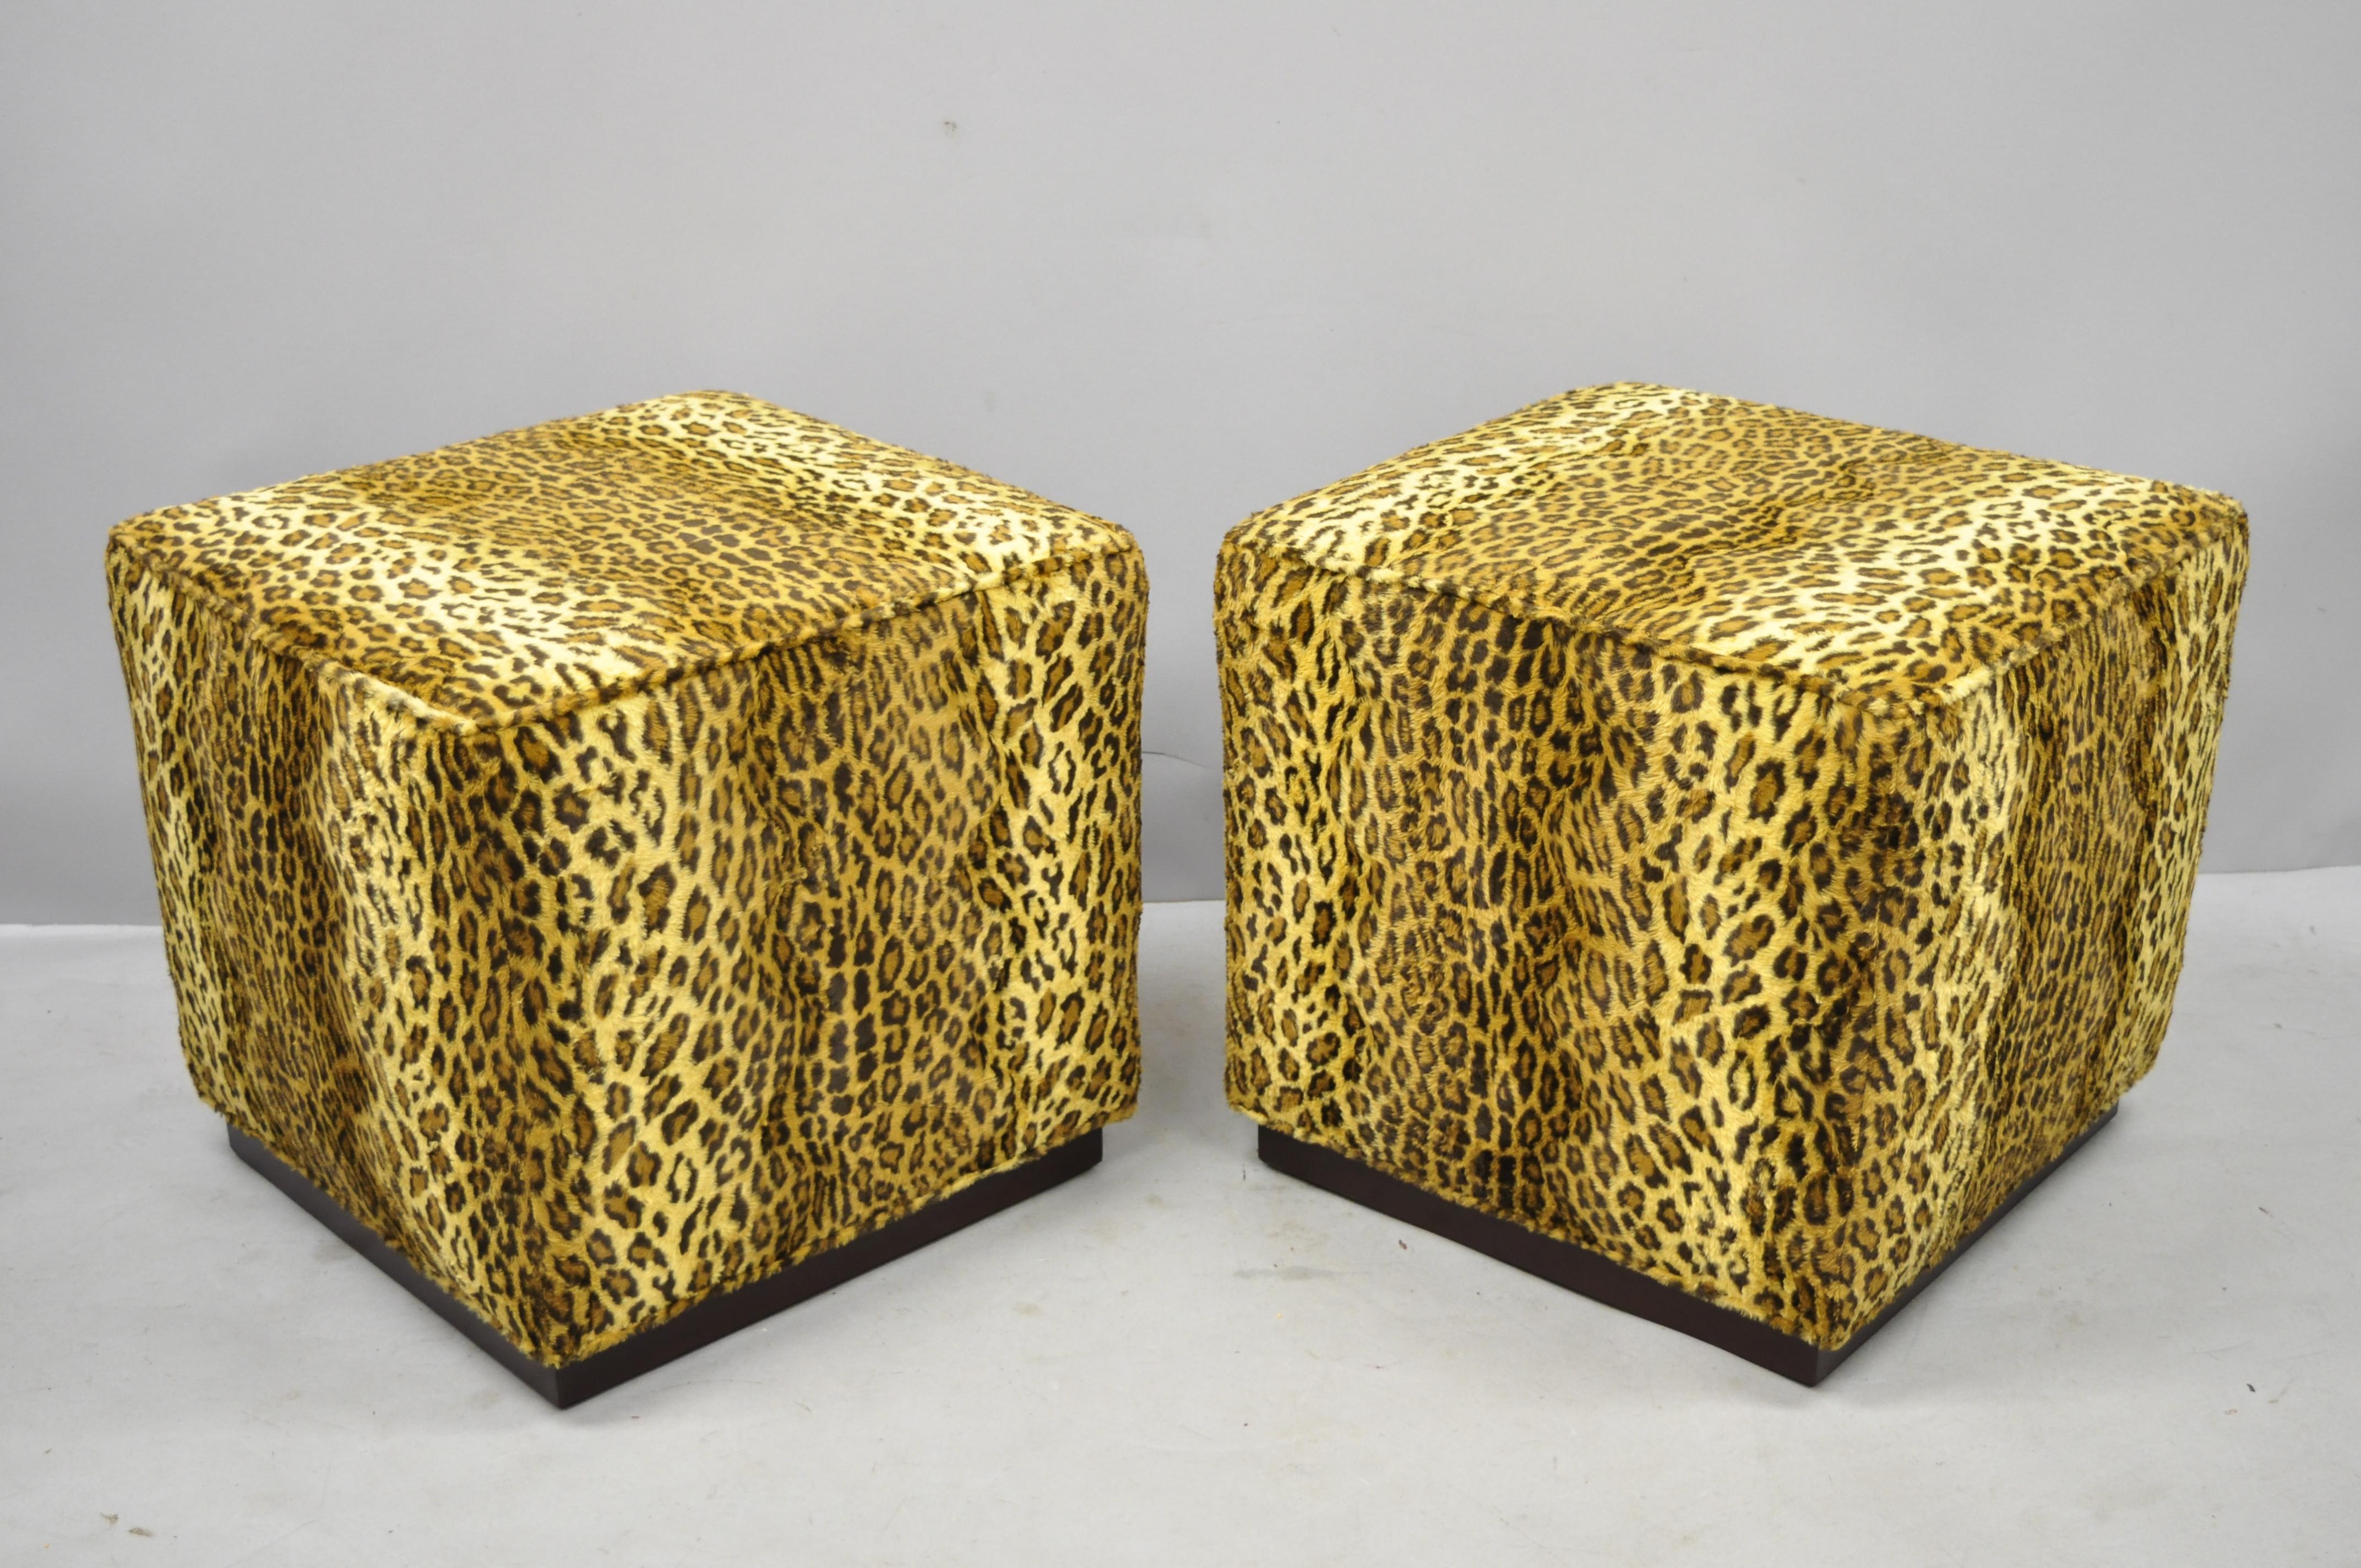 Pair of Colby Cube Ottoman Stools Leopard Cheetah Print Fabric by Barclay Butera 4